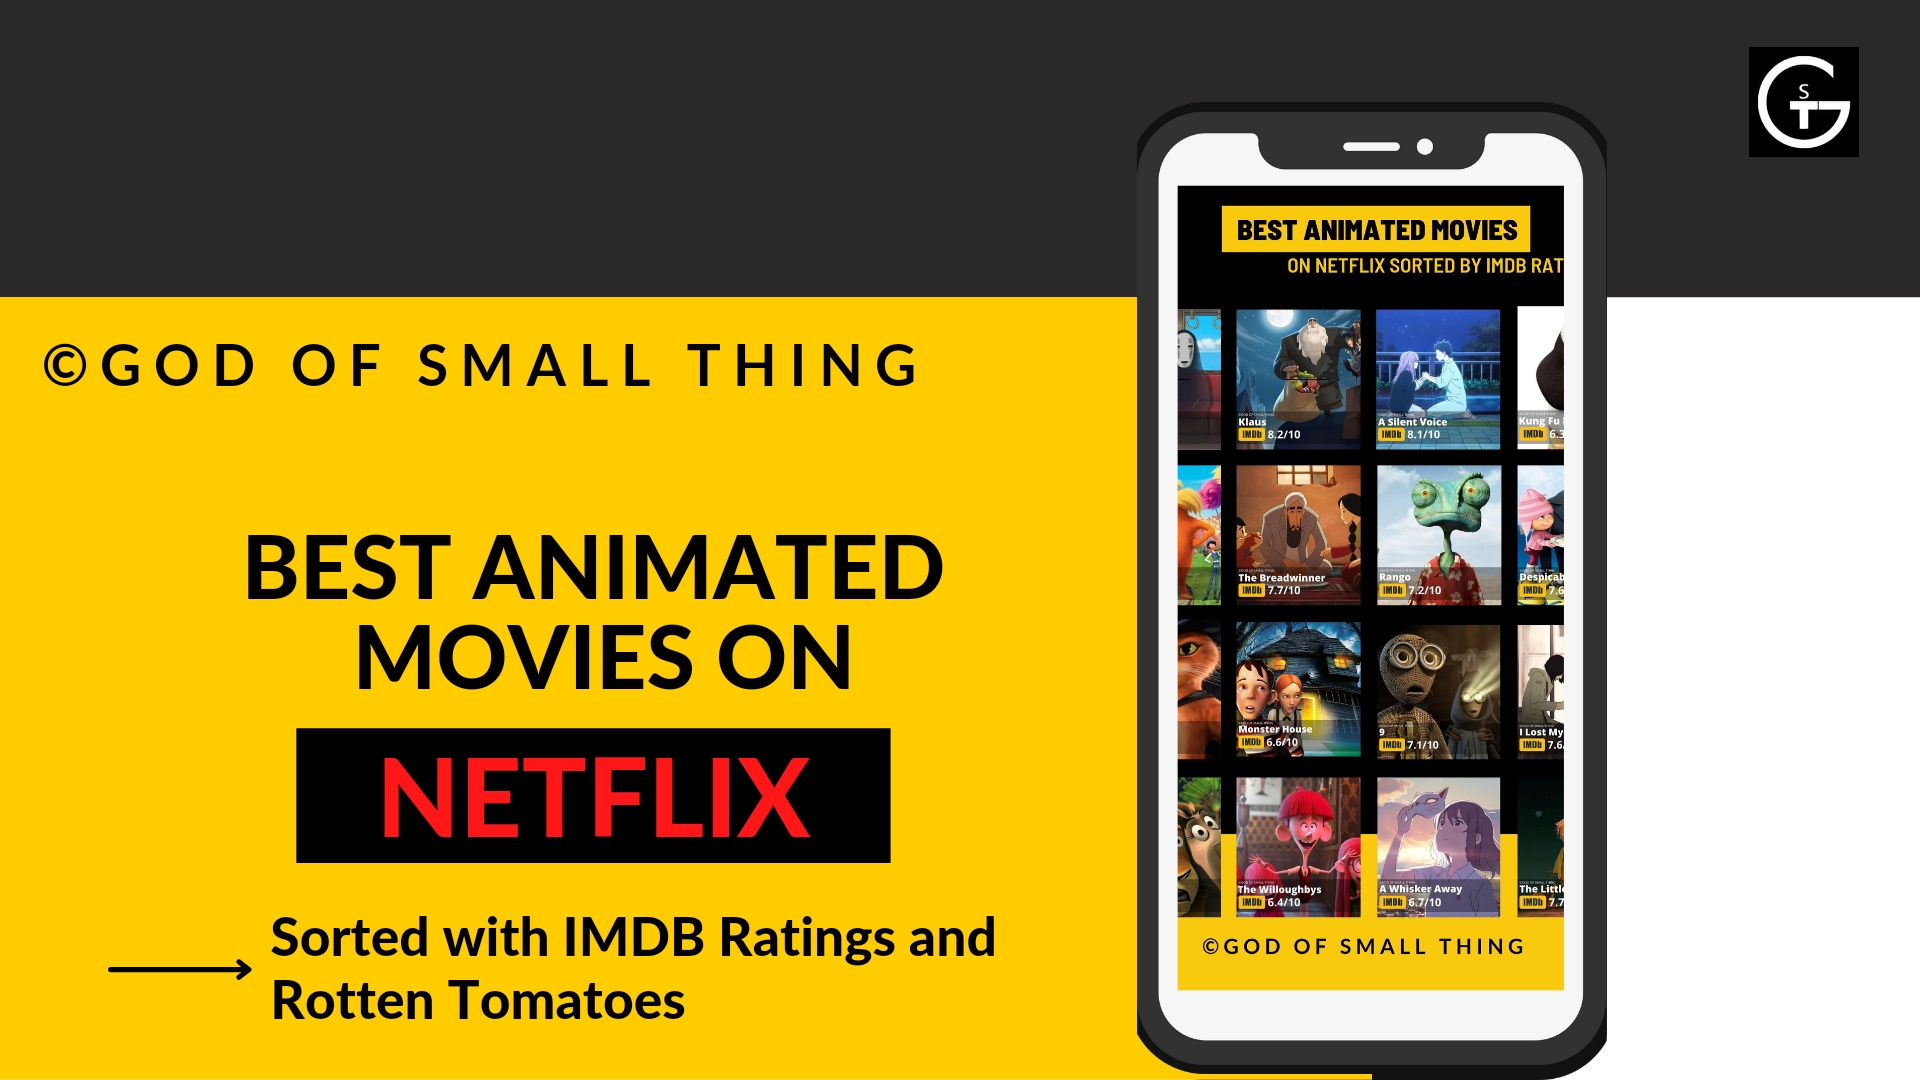 The Best animated movies on Netflix sorted by IMDB Ratings